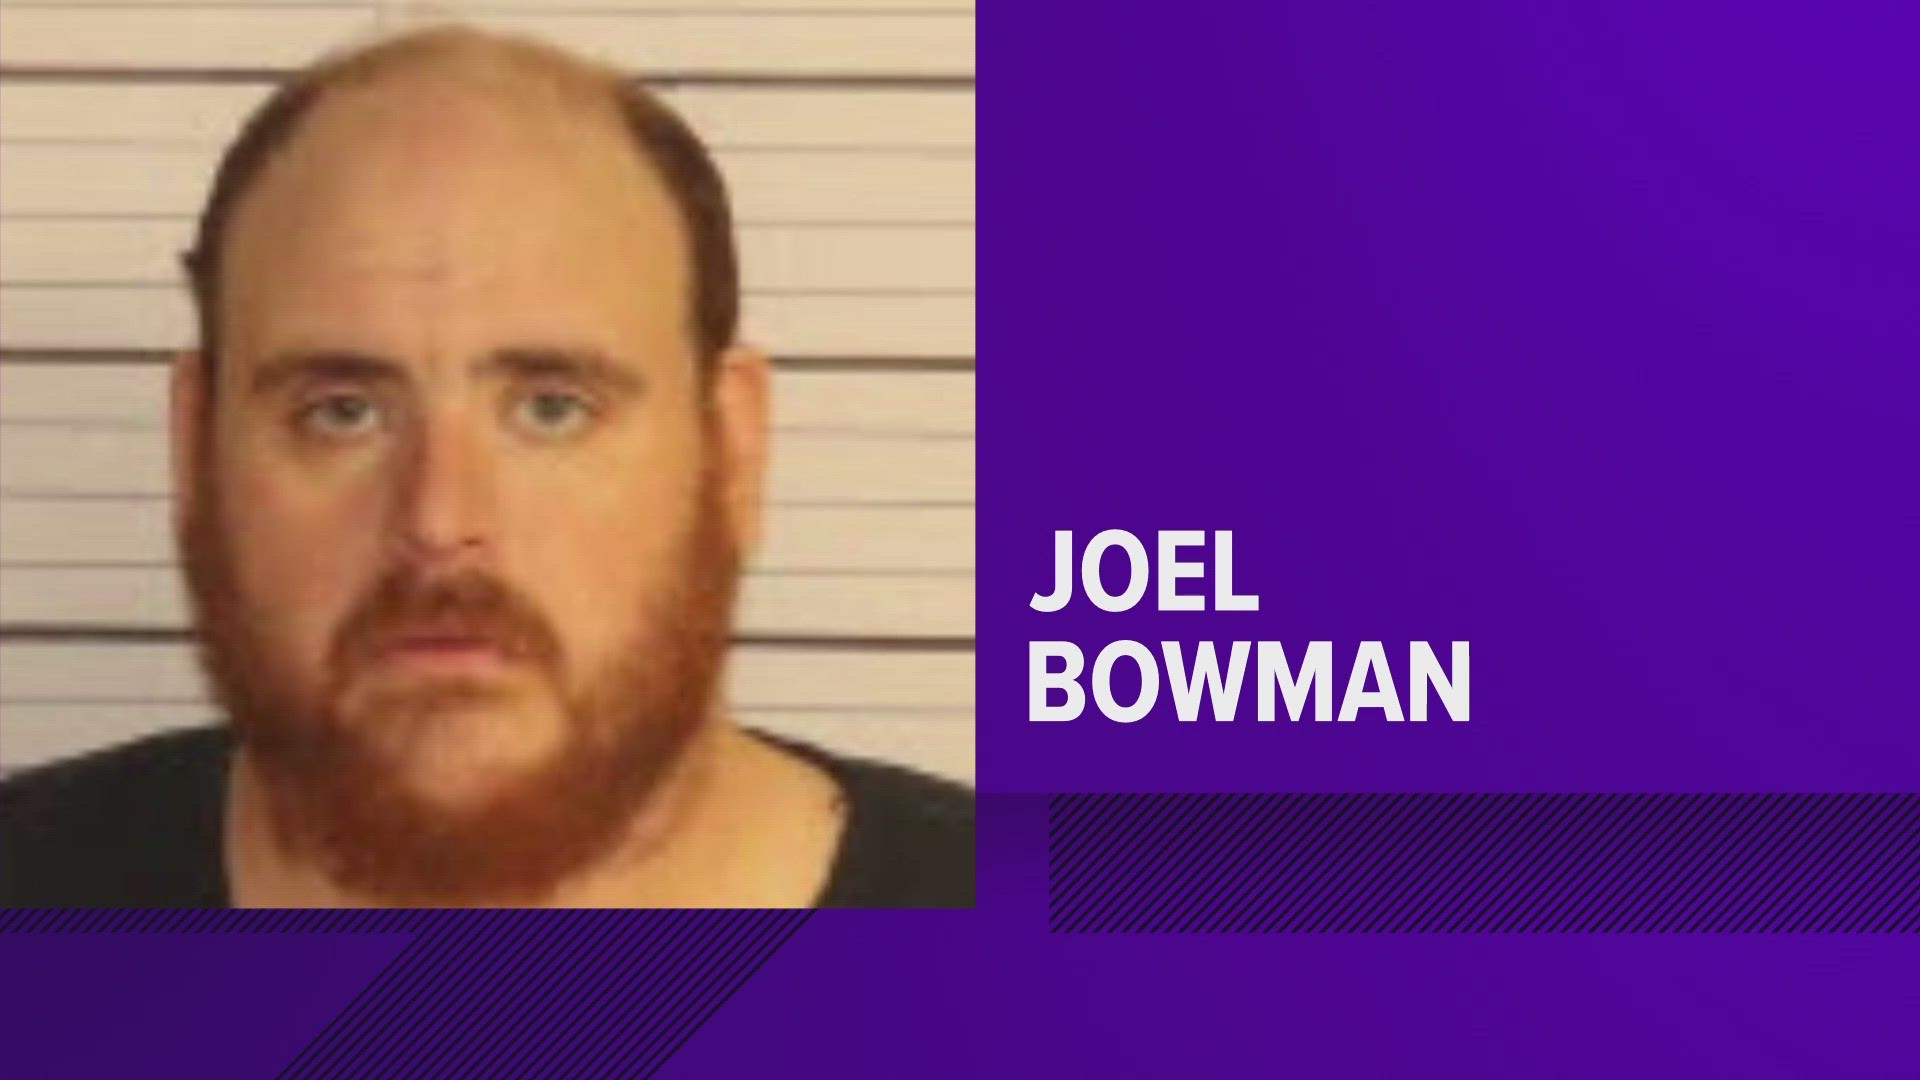 33-year-old Joel Bowman was charged with attempted murder and reckless endangerment, among other charges. No one at the school was hurt during the incident.